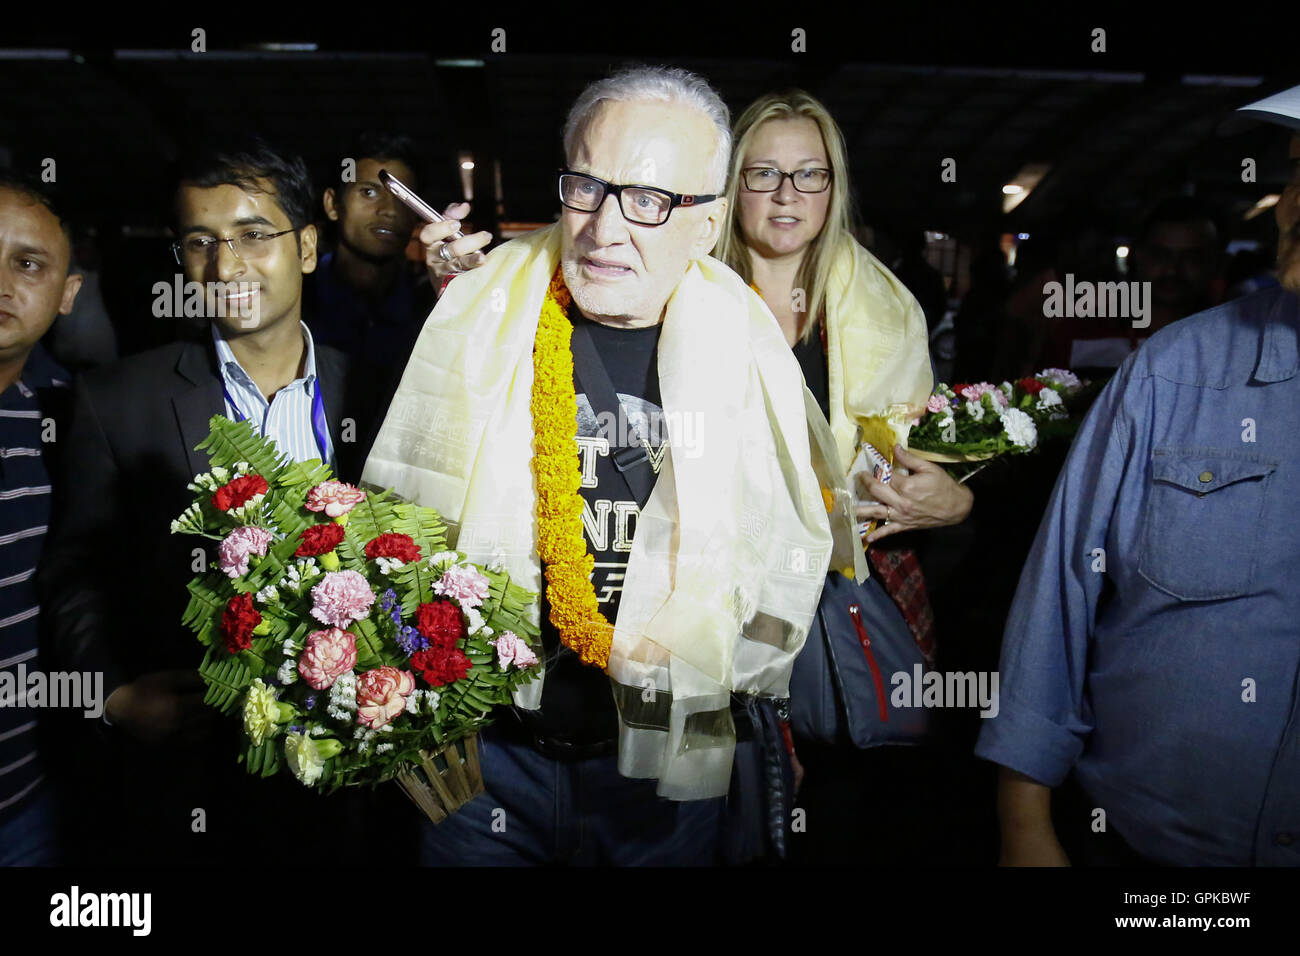 Kathmandu, Nepal. 4th Sep, 2016. Former NASA astronaut and one of the first persons to set foot on the moon, Buzz Aldrin, gestures as he arrives at Tribhuvan International Airport in Kathmandu, Nepal on Sunday, September 4, 2016. He was one of the first two humans to land on the Moon setting foot at 03:15:16 on July 21, 1969, during Apollo 11 mission, following commander Neil Armstrong. He is in Nepal to formally speak about his experience to the moon to mark National Science Day. © Skanda Gautam/ZUMA Wire/Alamy Live News Stock Photo